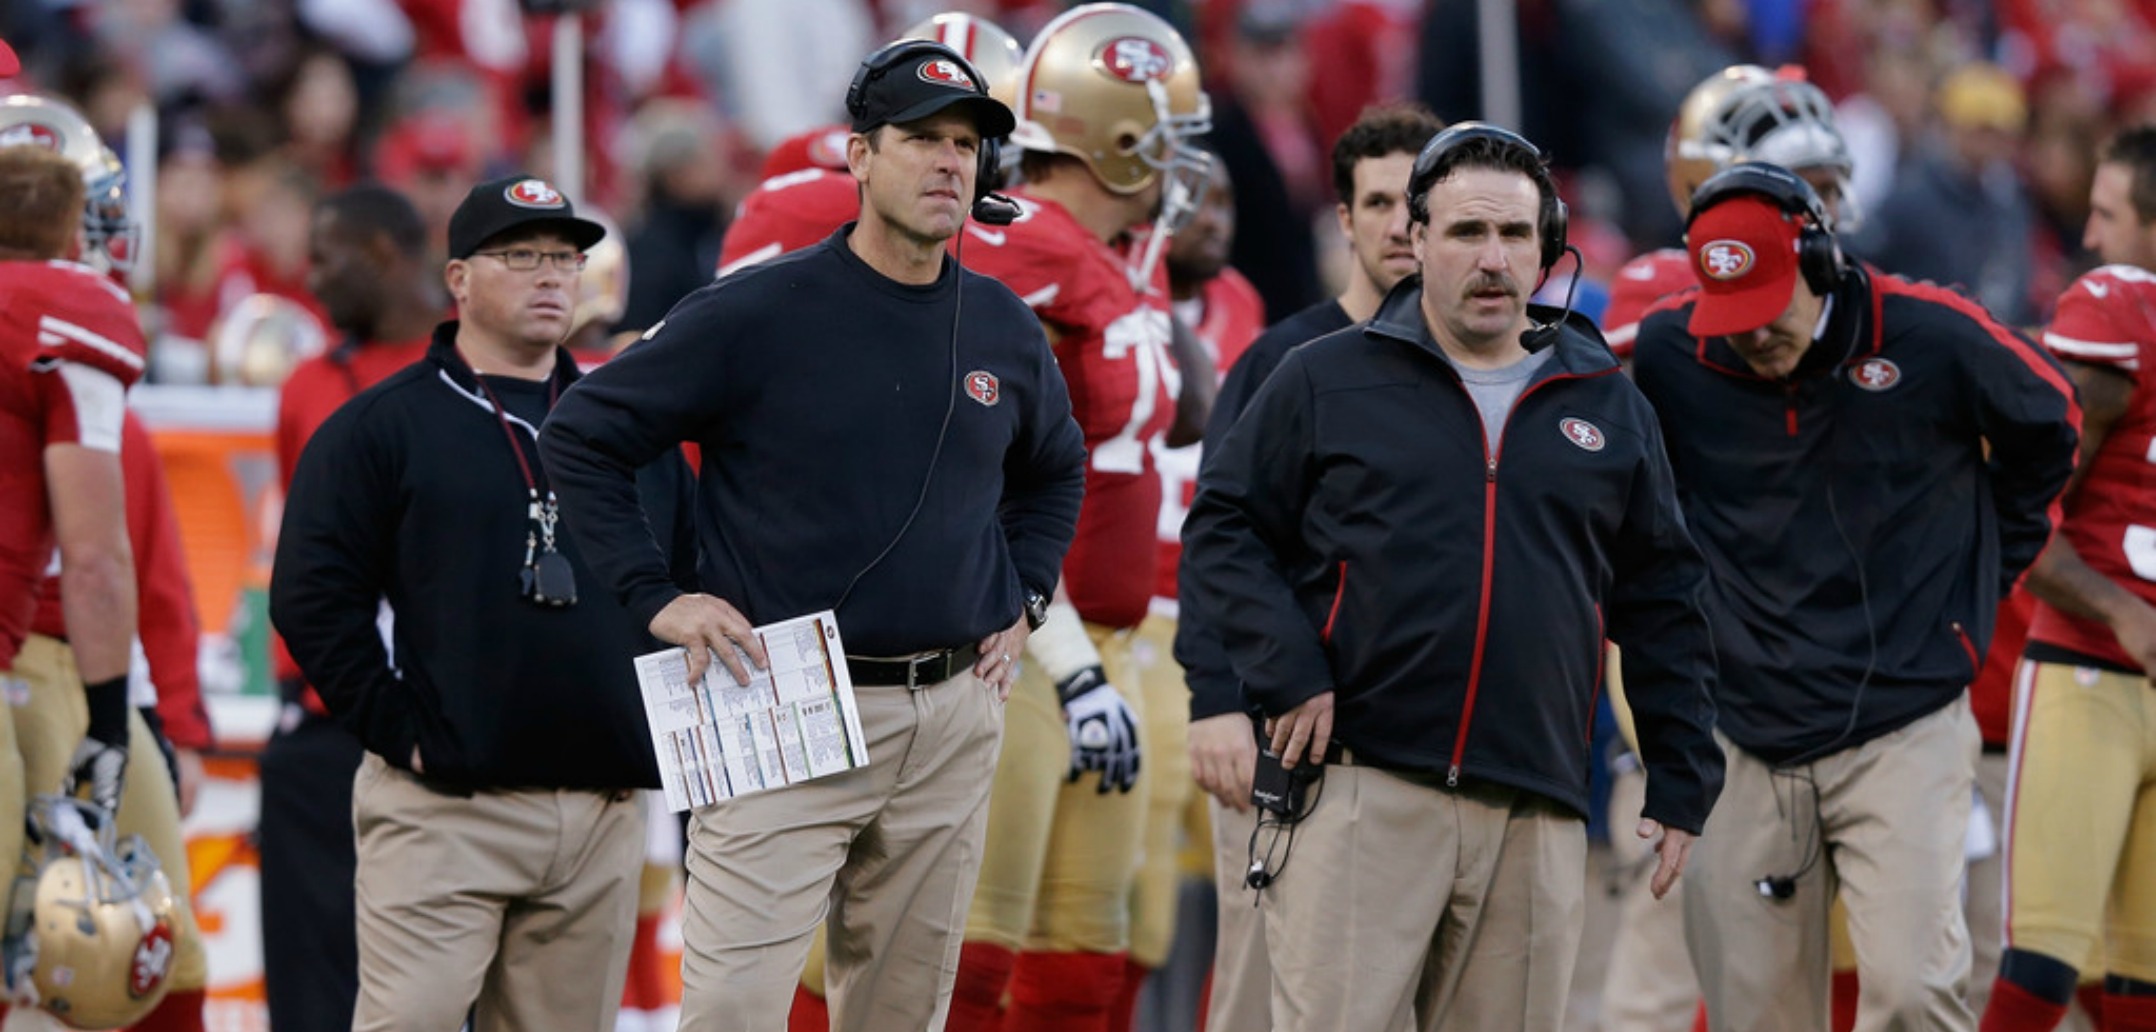 Courtesy of Zimbio: Teams have already discussed Tomsula as a head coaching candidate. 